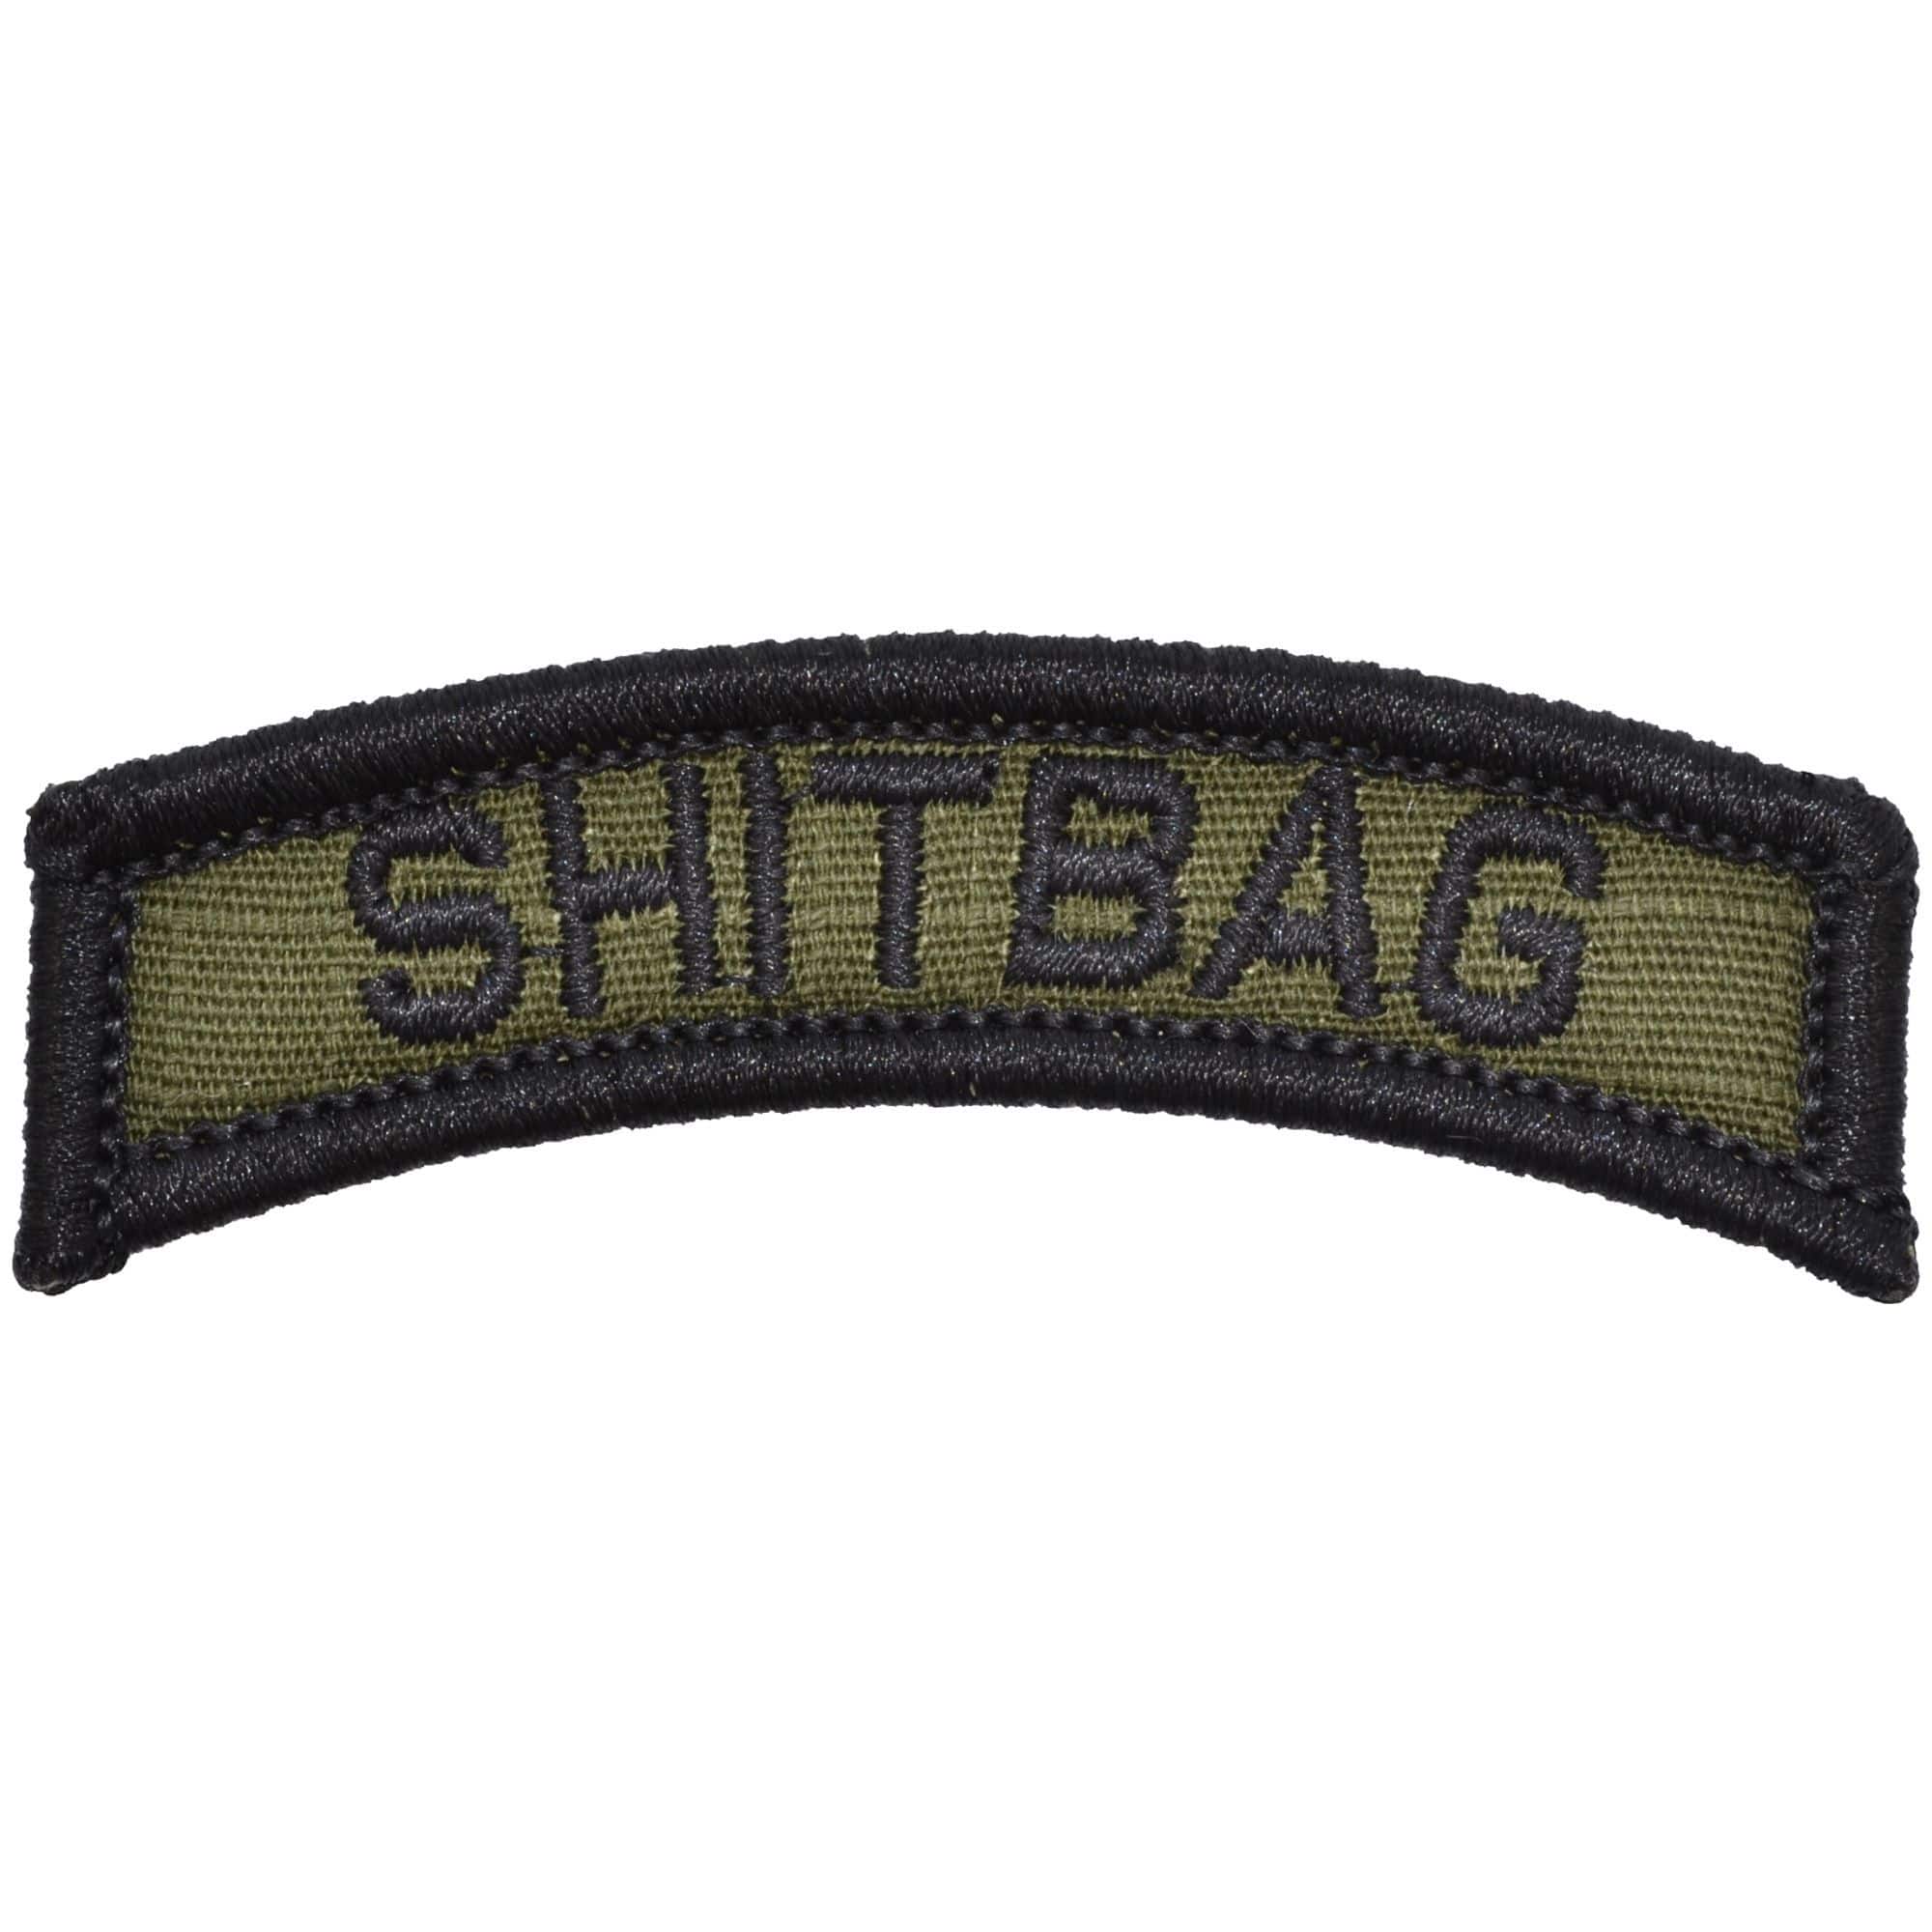 Tactical Gear Junkie Patches Olive Drab Shitbag Tab Patch